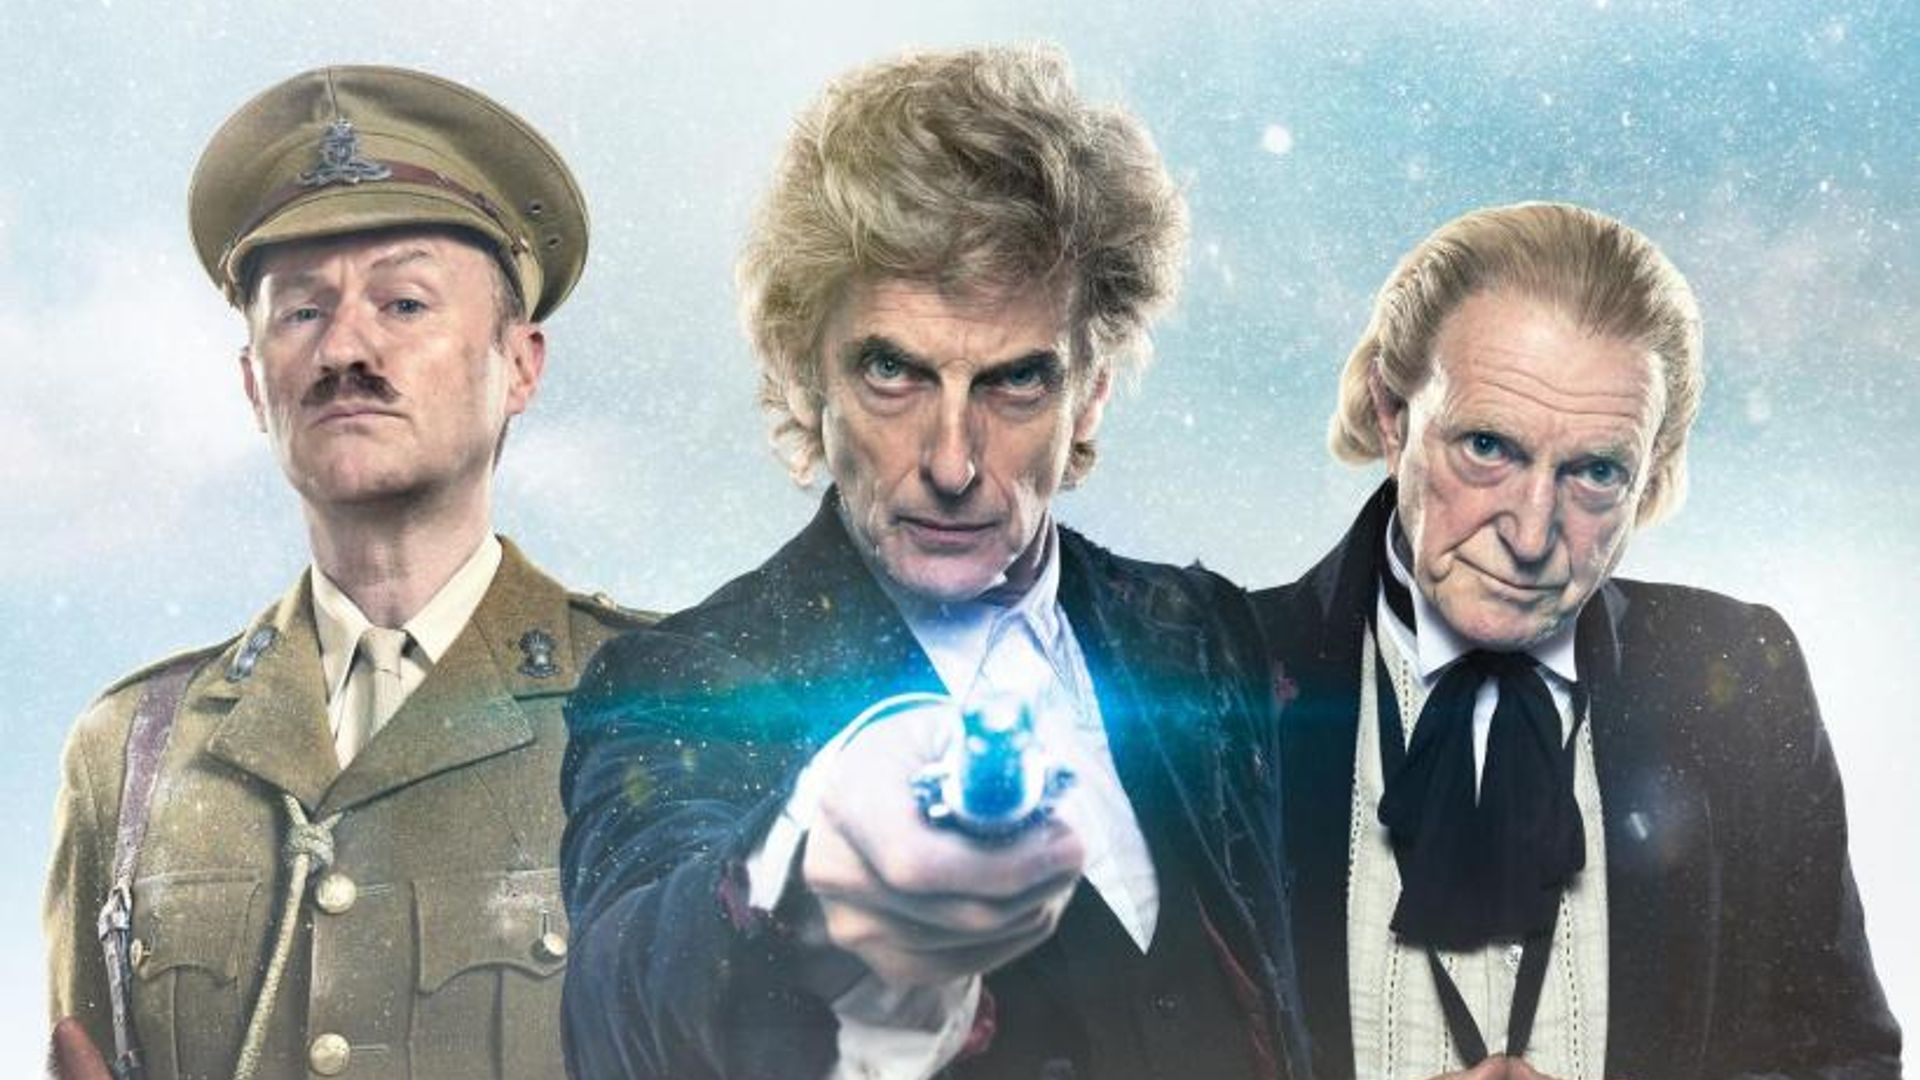 Would you like Doctor Who to land on iPlayer in one go?